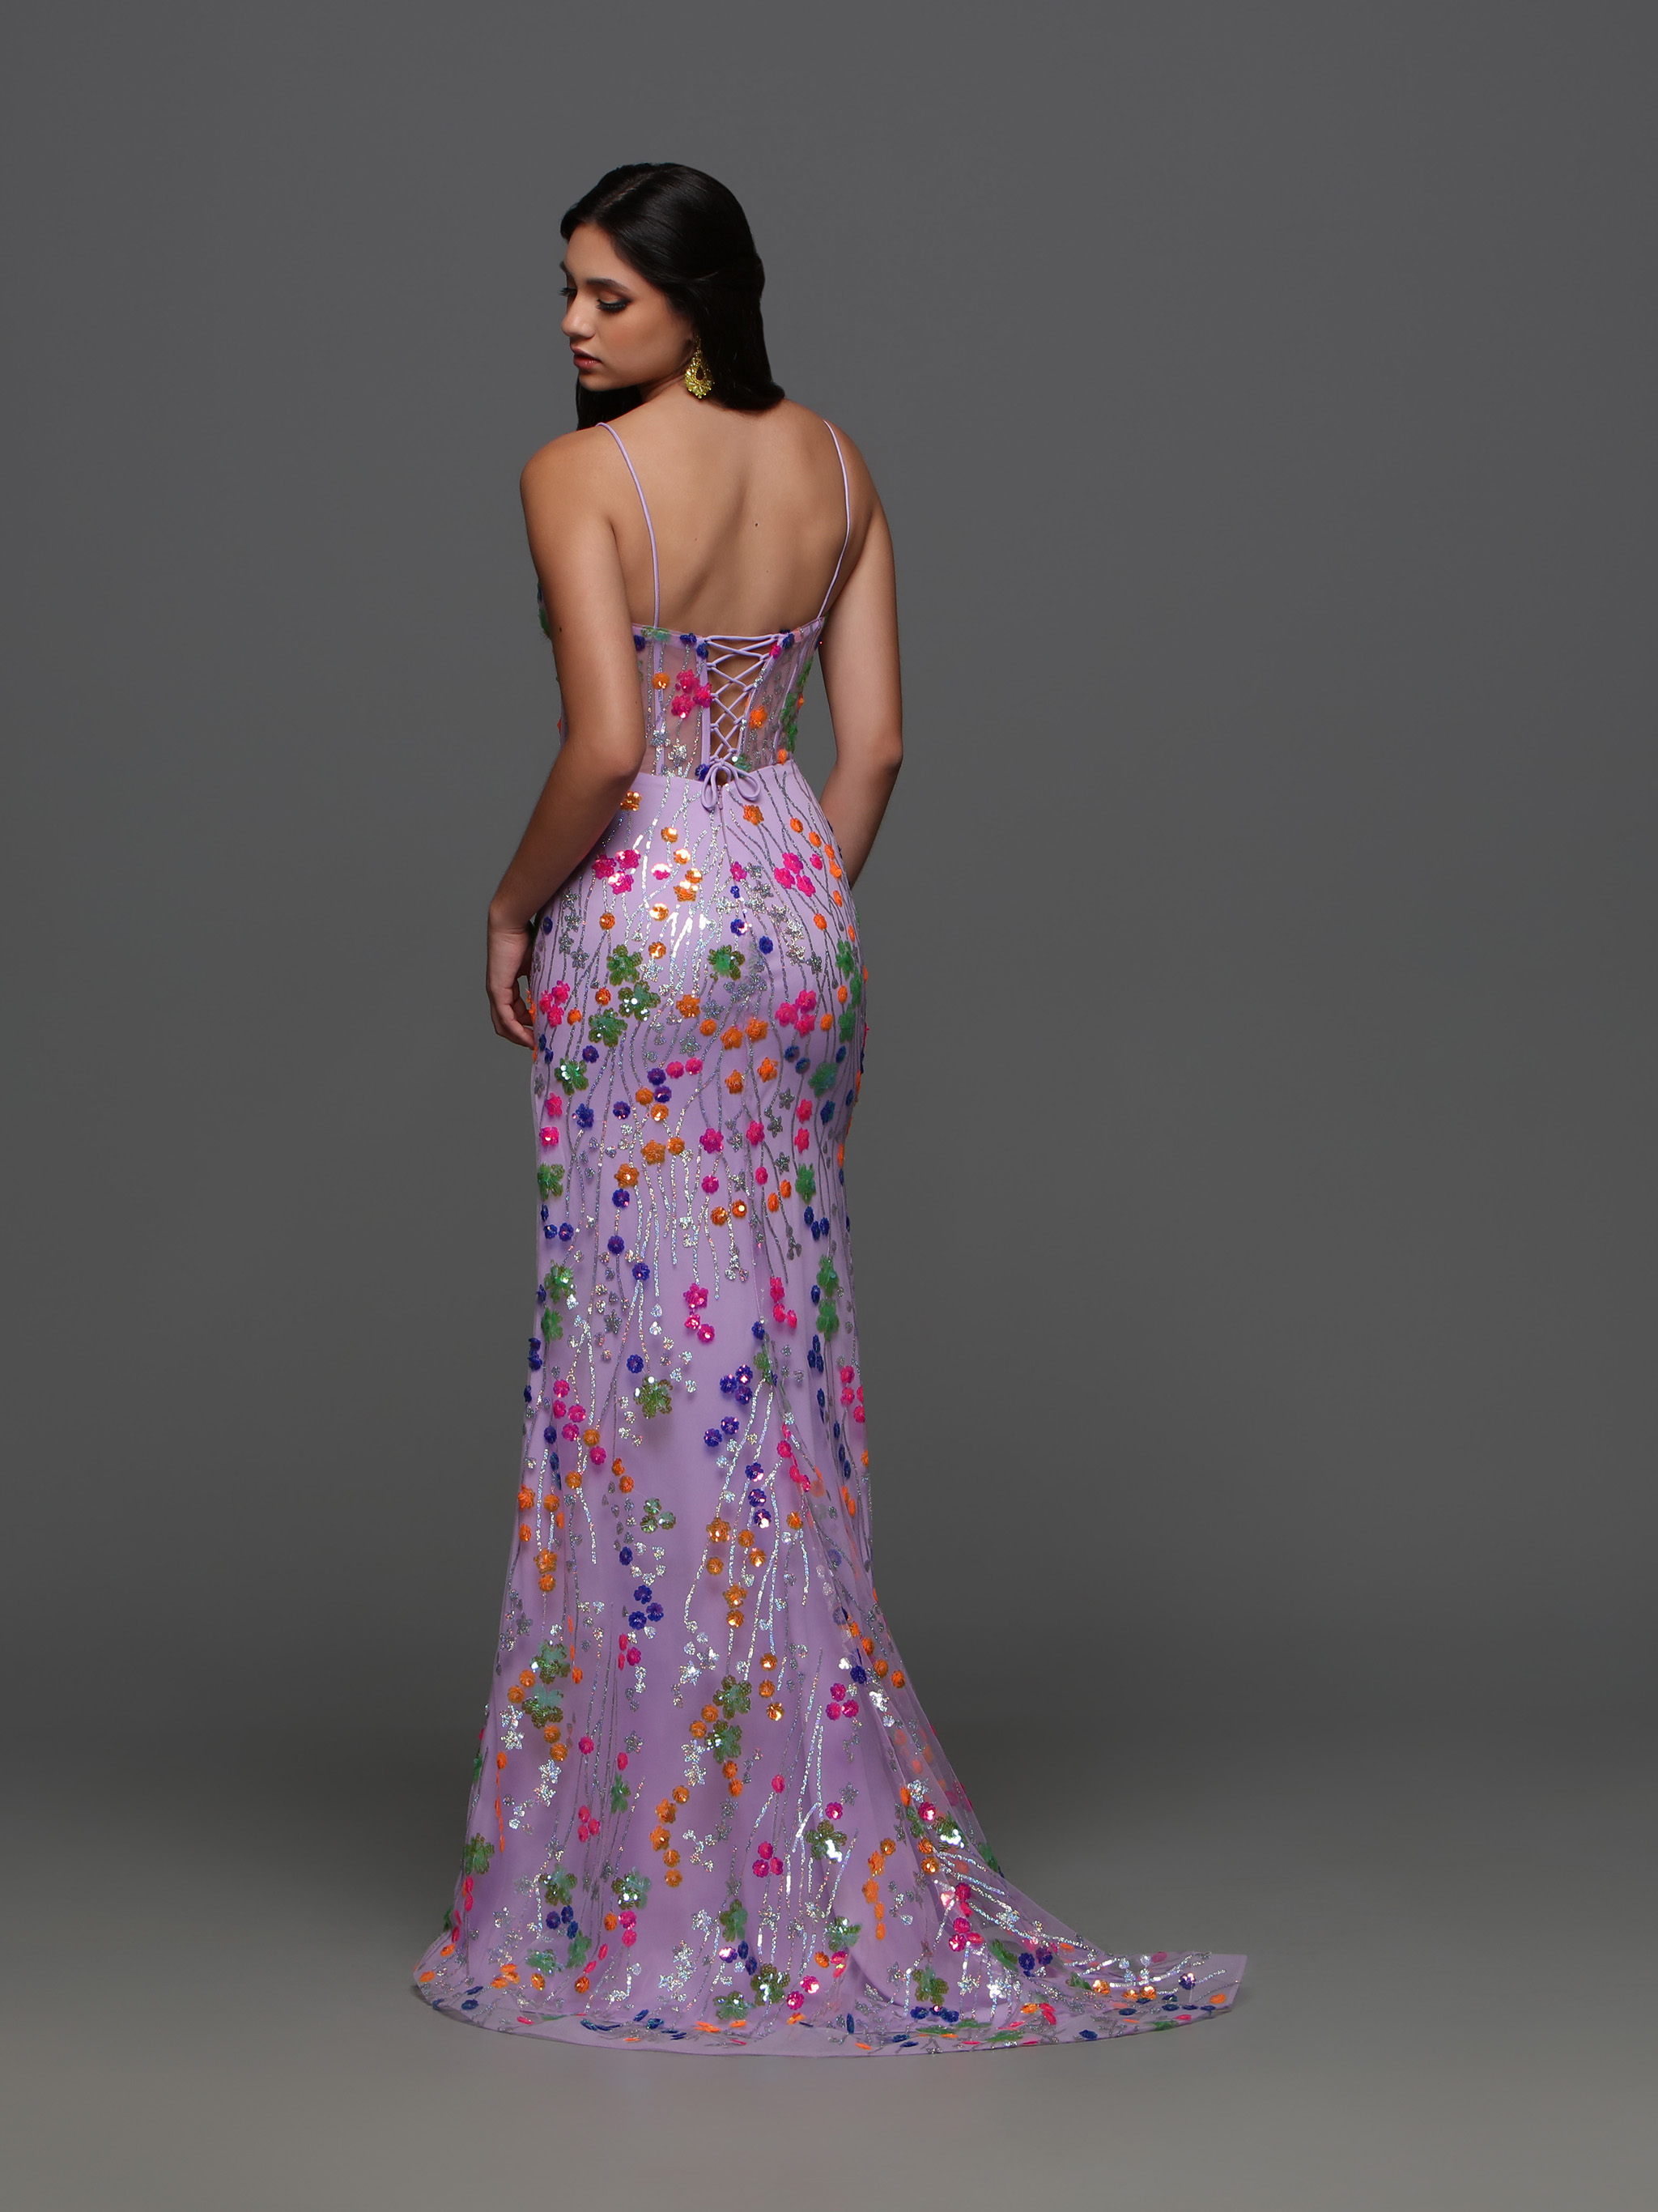 Image showing back view of style #72396